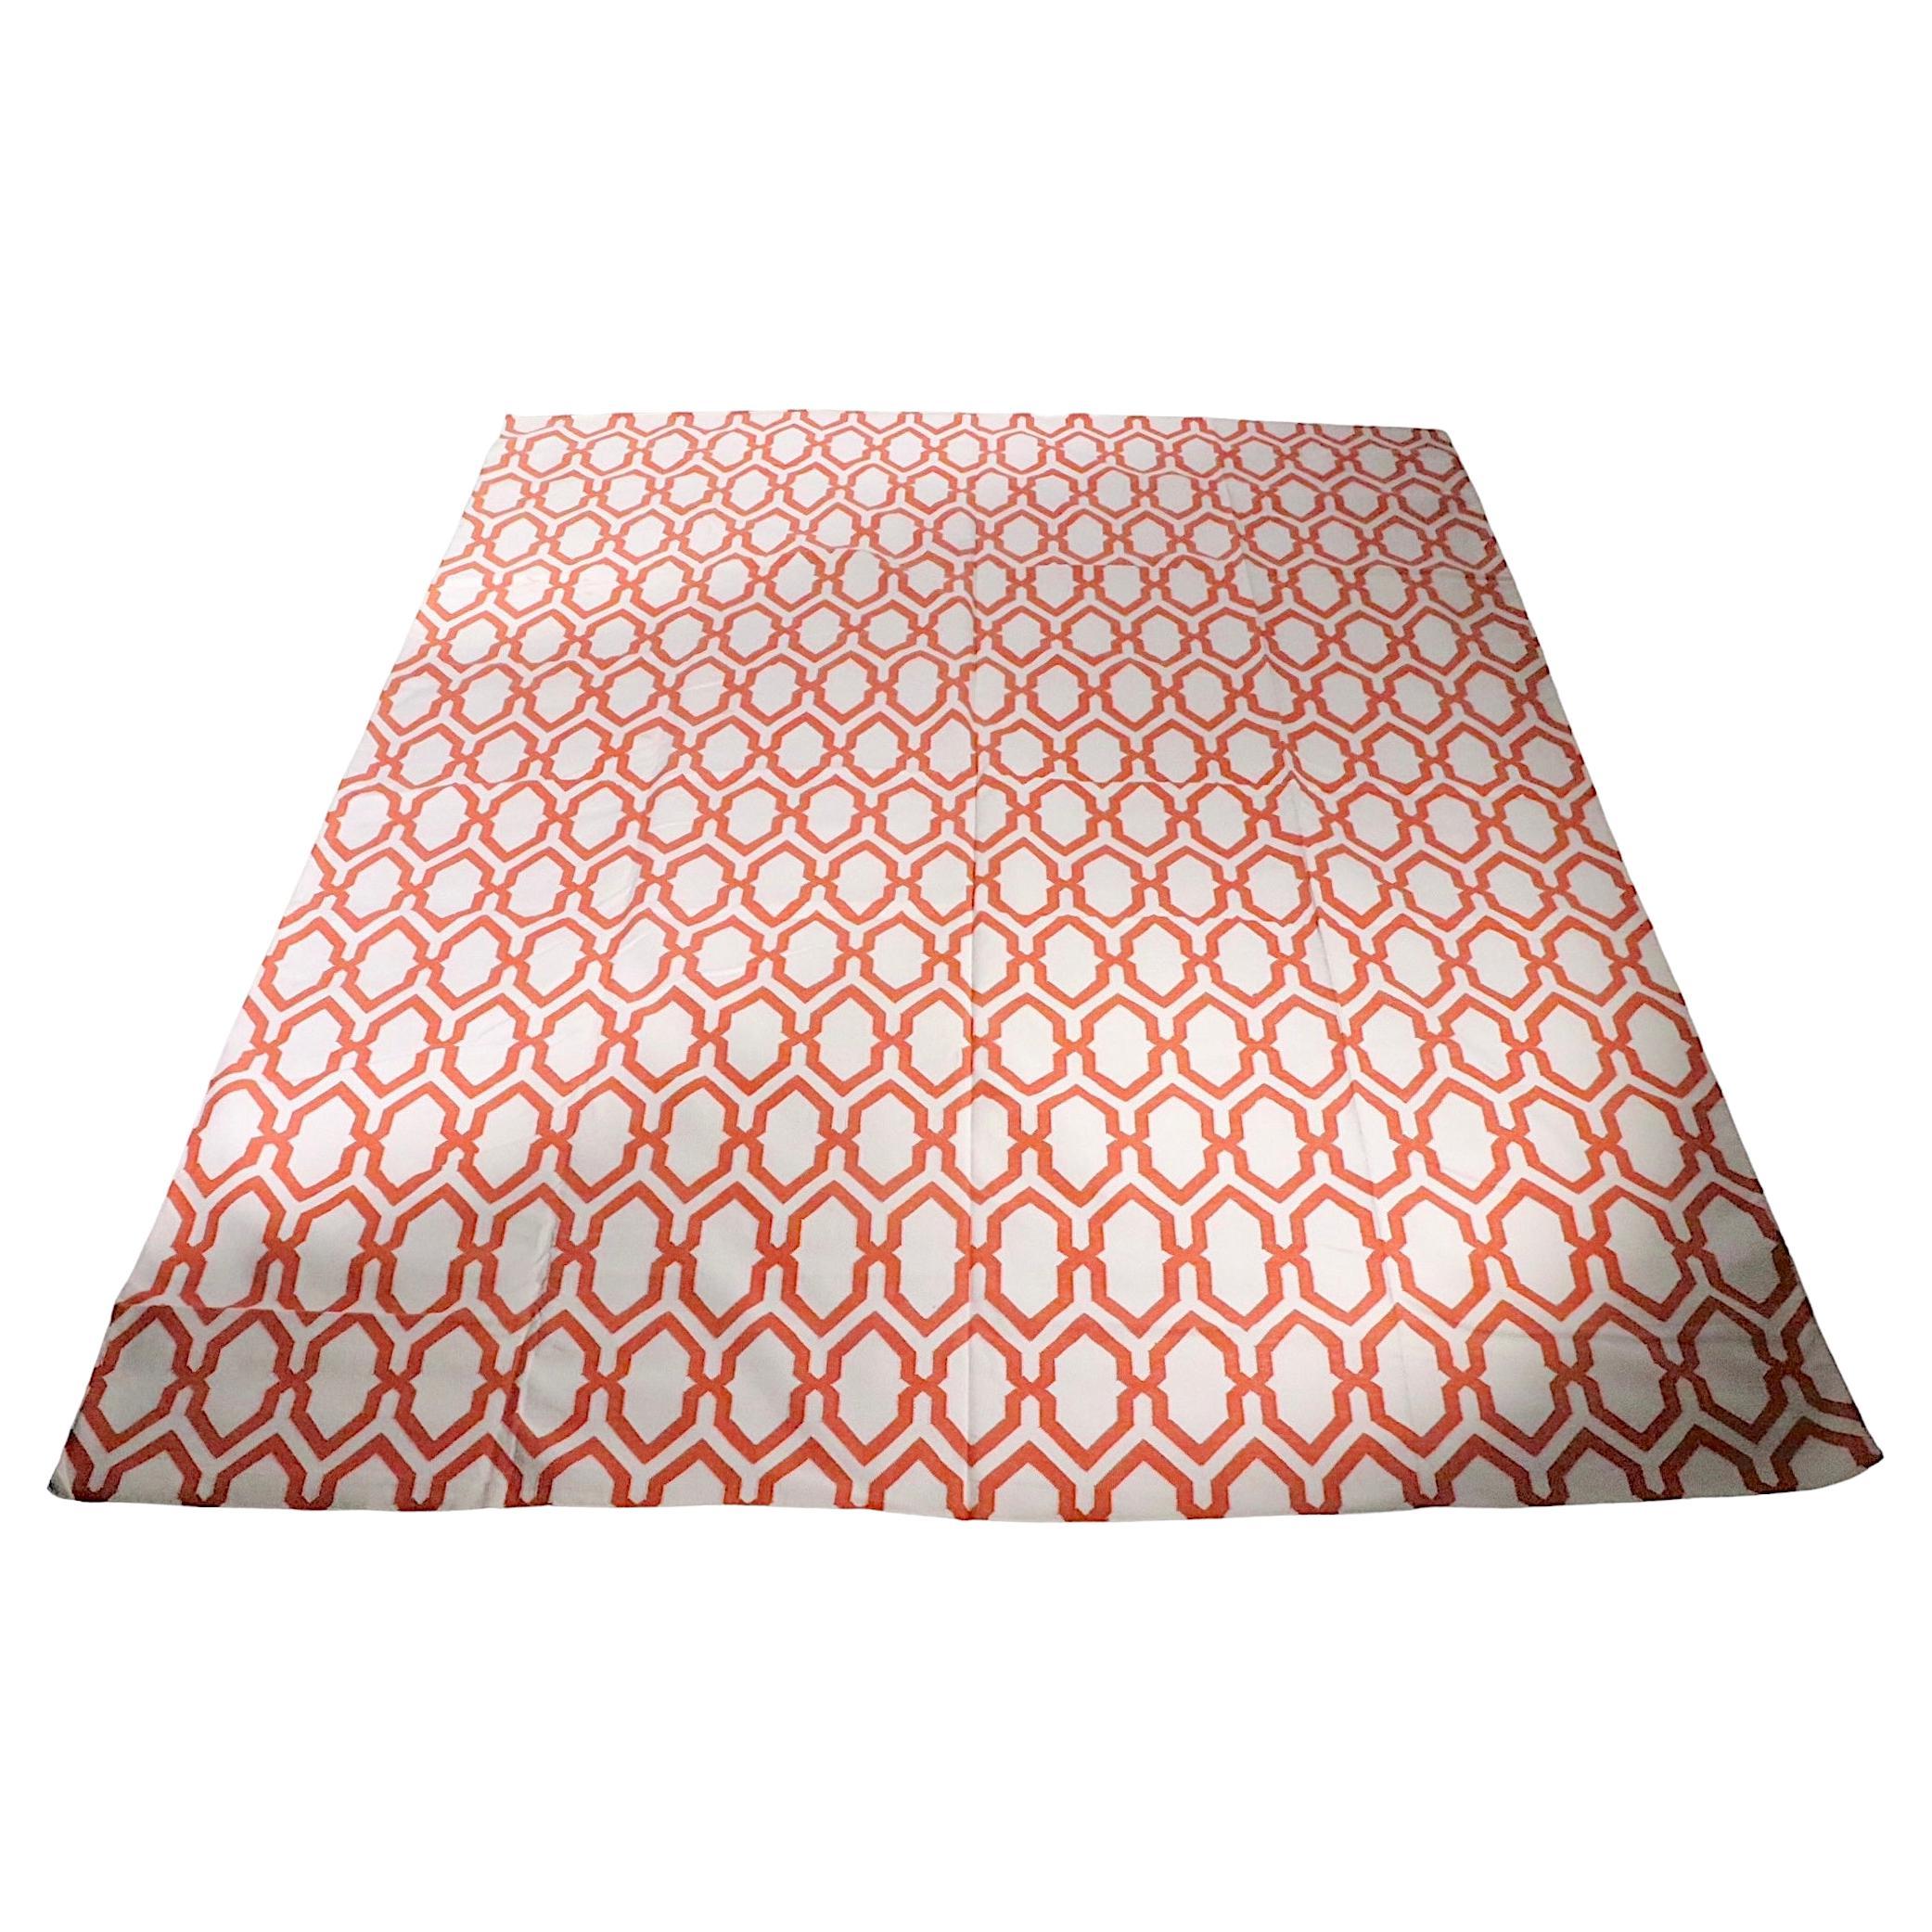 Jali Orange Dhurrie by the Rug Company, circa 2014 For Sale